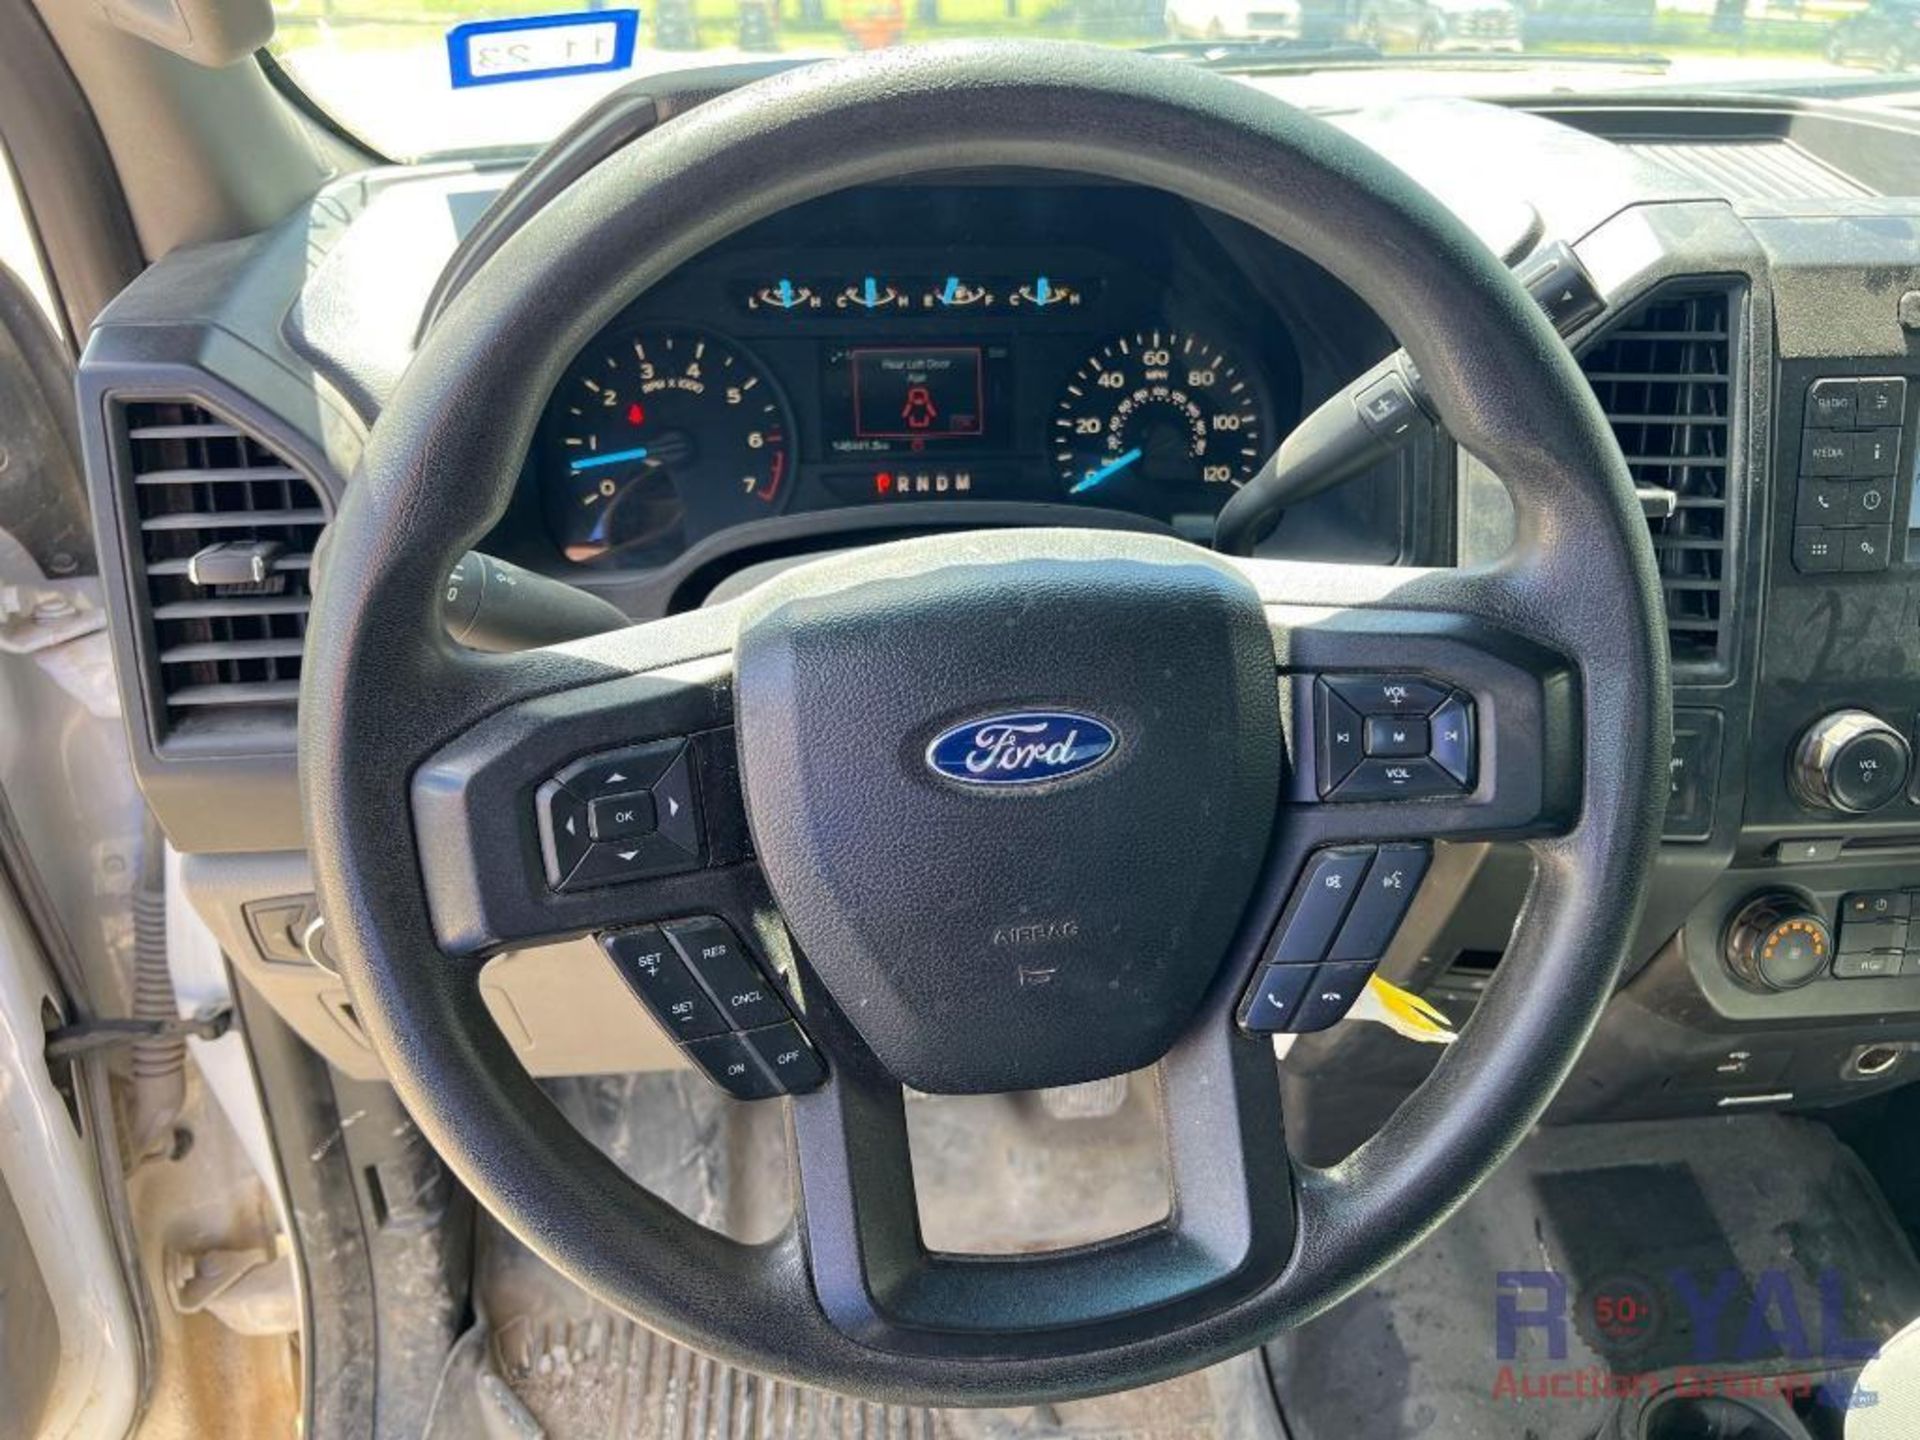 2018 Ford F150 4x4 Extended Cab Pickup Truck - Image 26 of 56